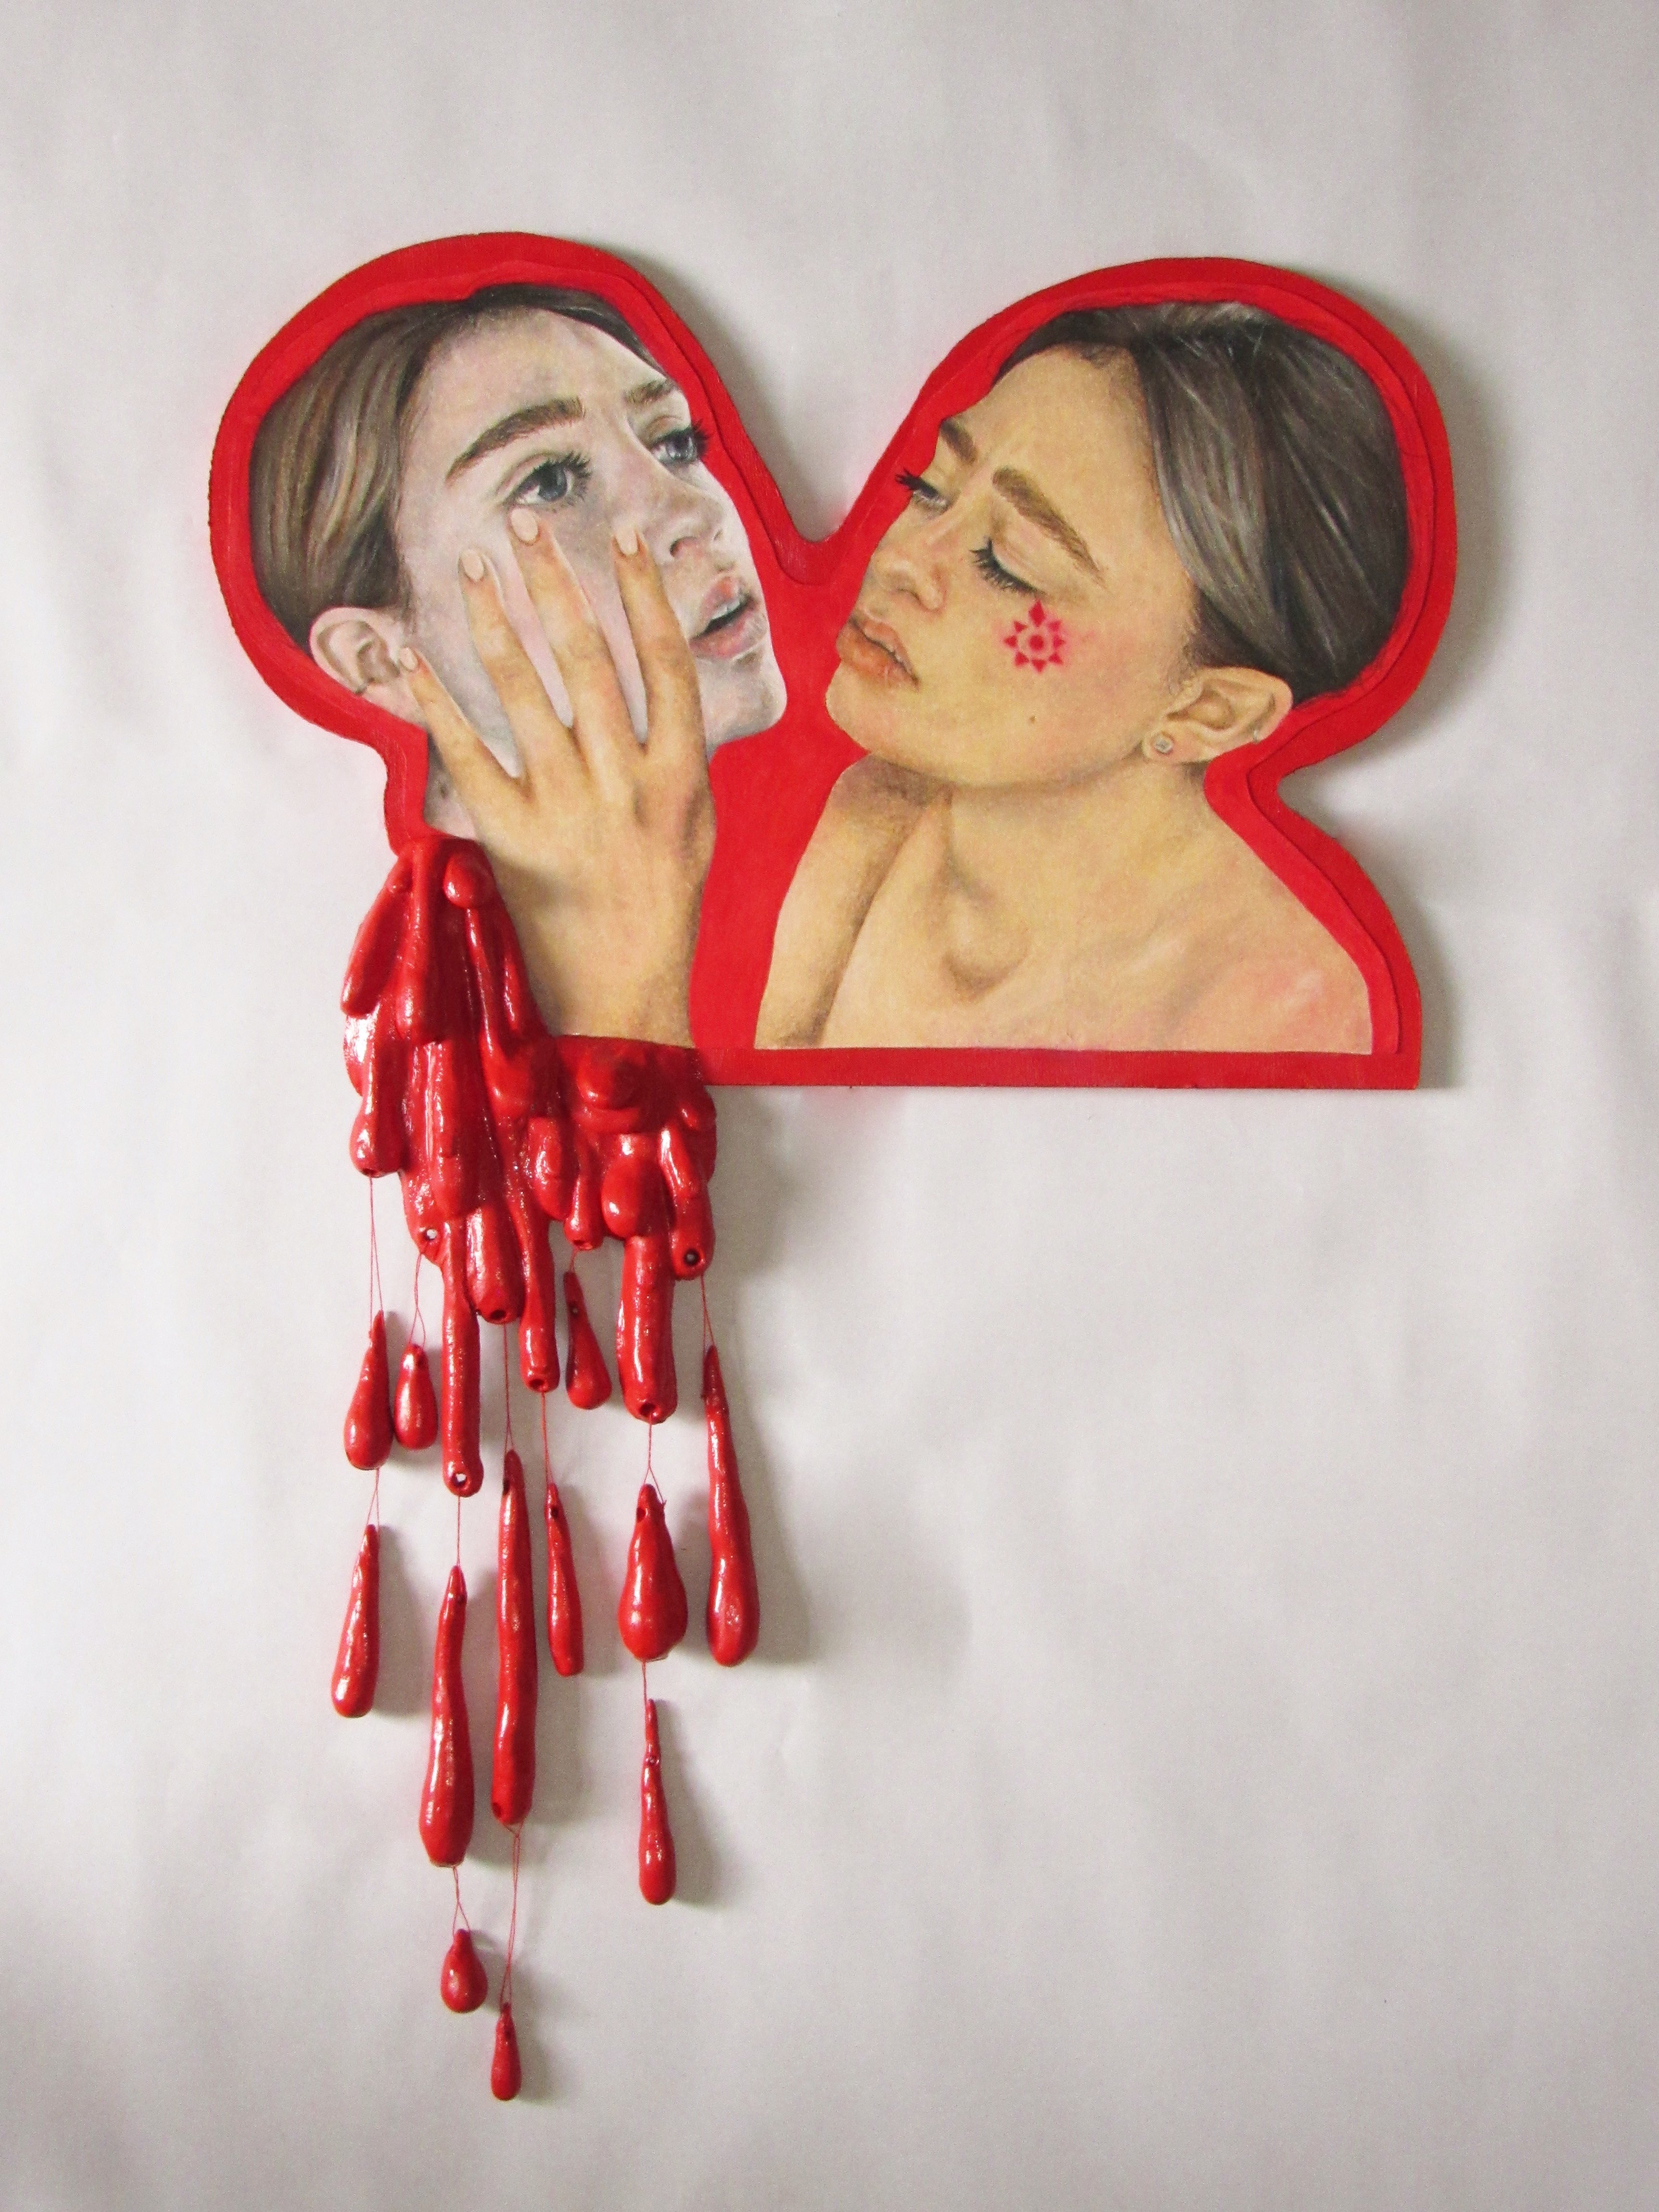 BA Fine Art work by Kate Chaplin showing a mirror image of a woman holding her own decapitated head. Below is a sculptural spilling of blood.